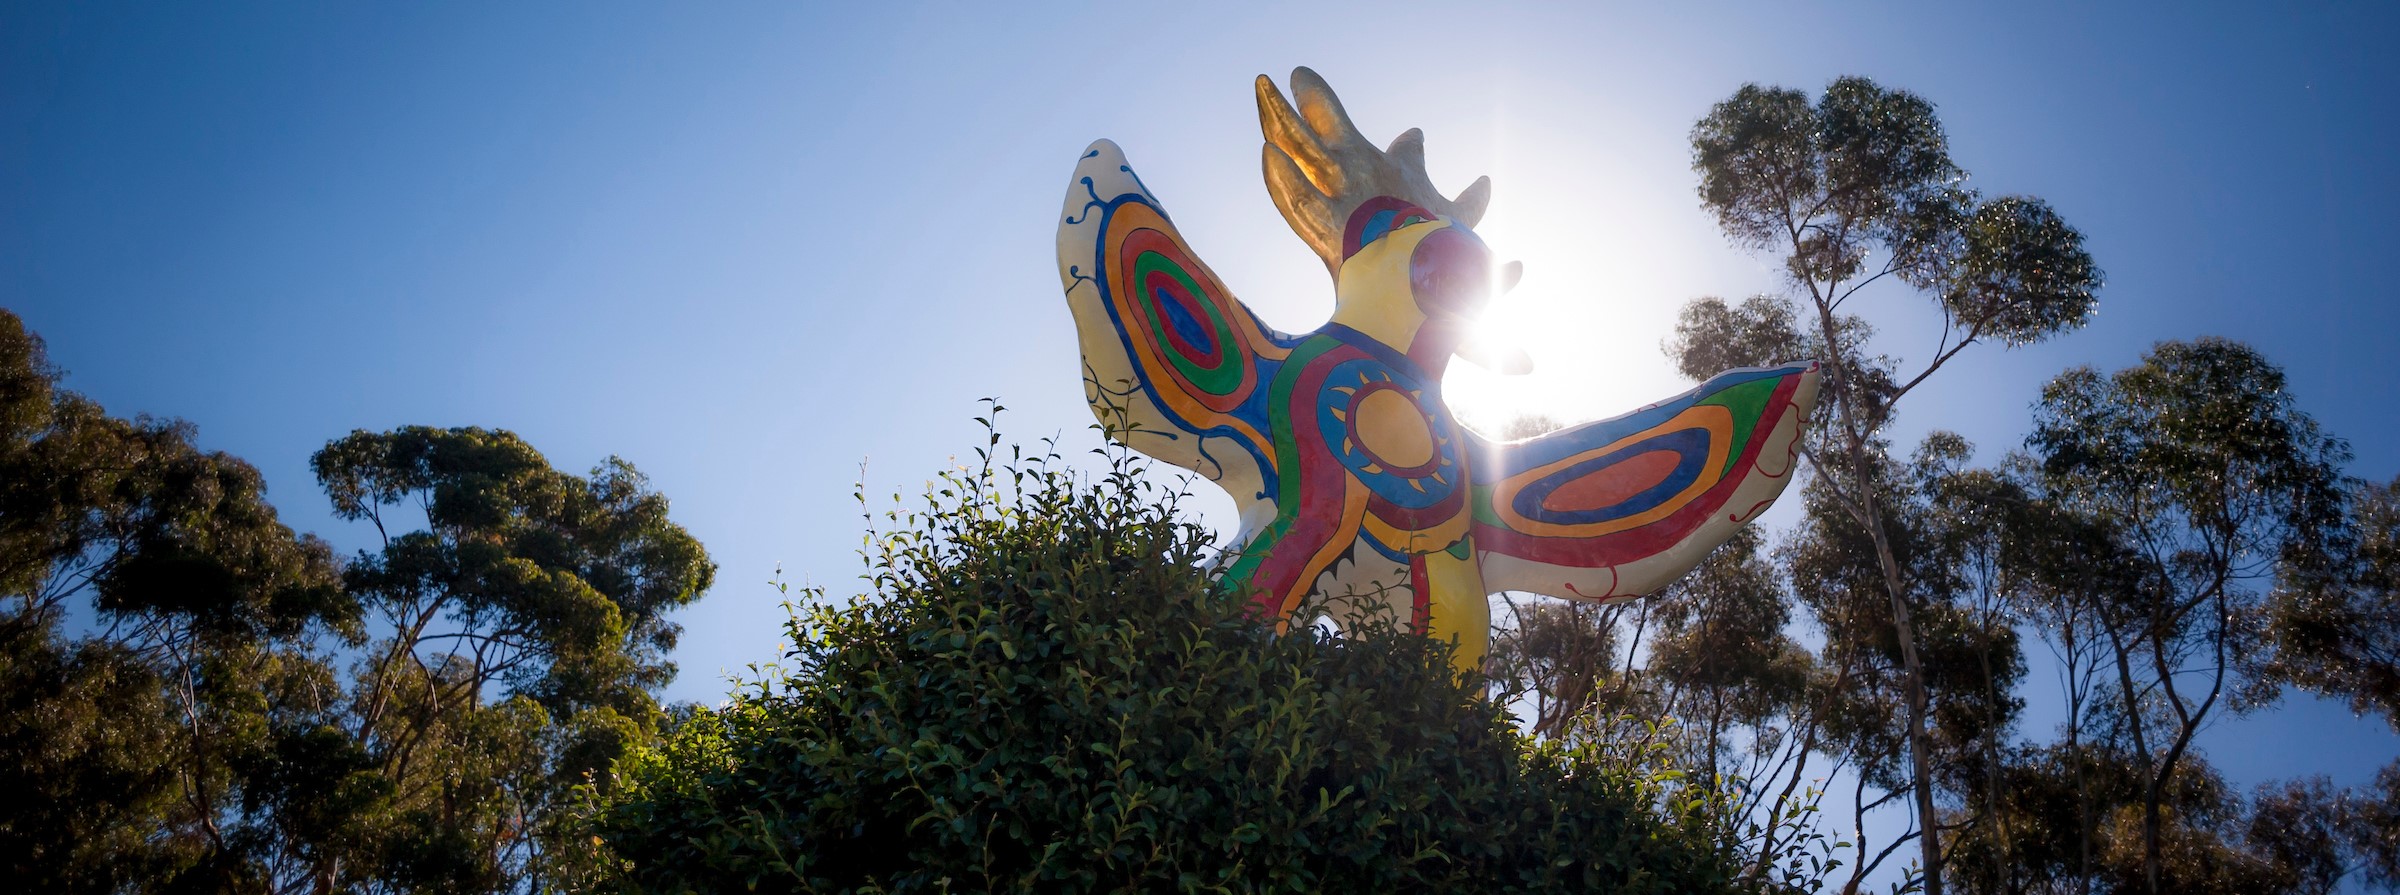 The colorful Sun God statue, with green trees and a blue sunny sky in the backdrop